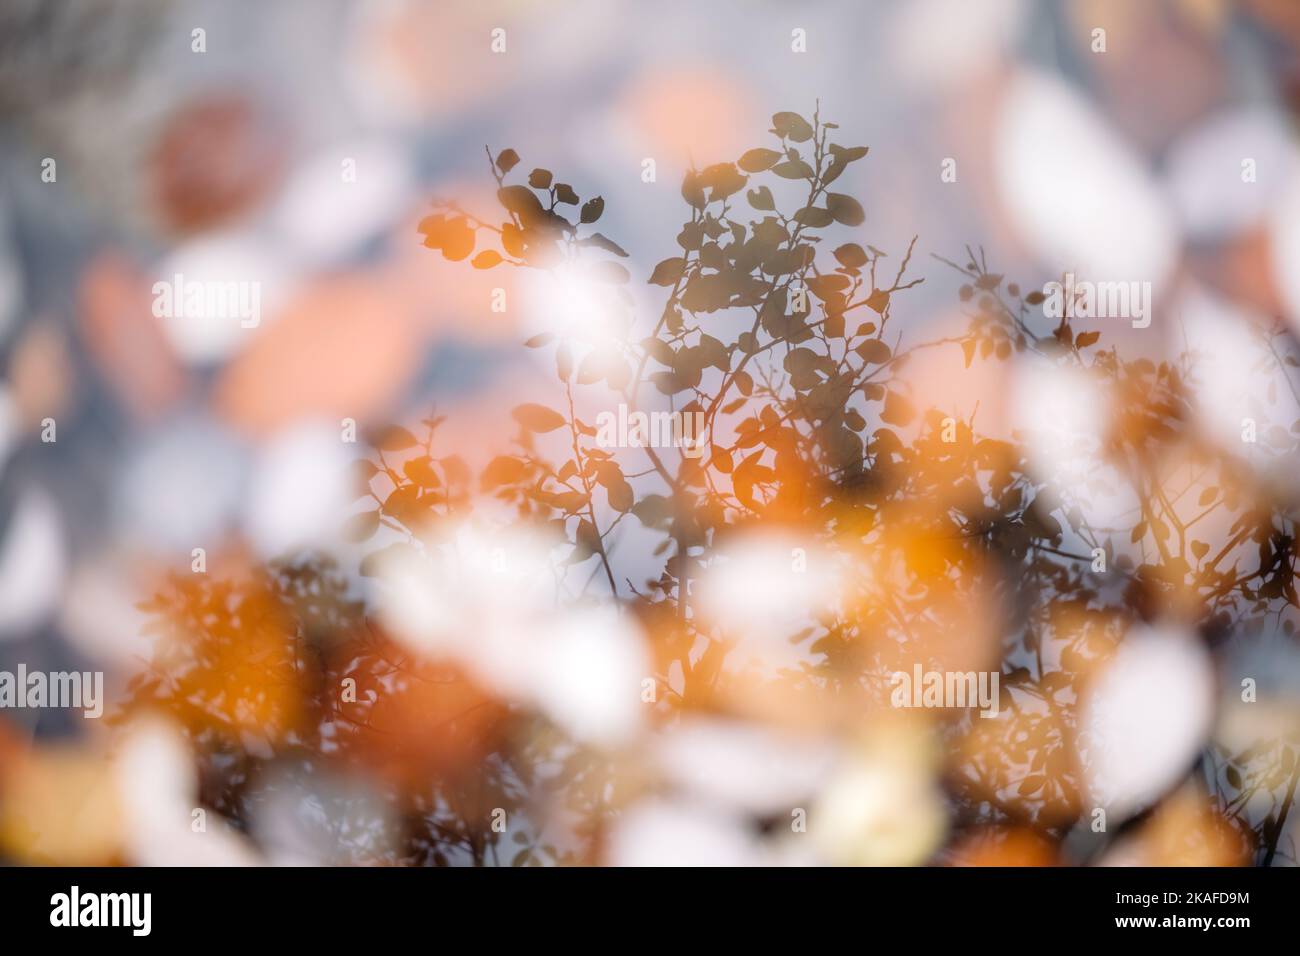 Silhouette of a tree reflected in a puddle with orange autumn leaves. Autumn and fall abstract background Stock Photo